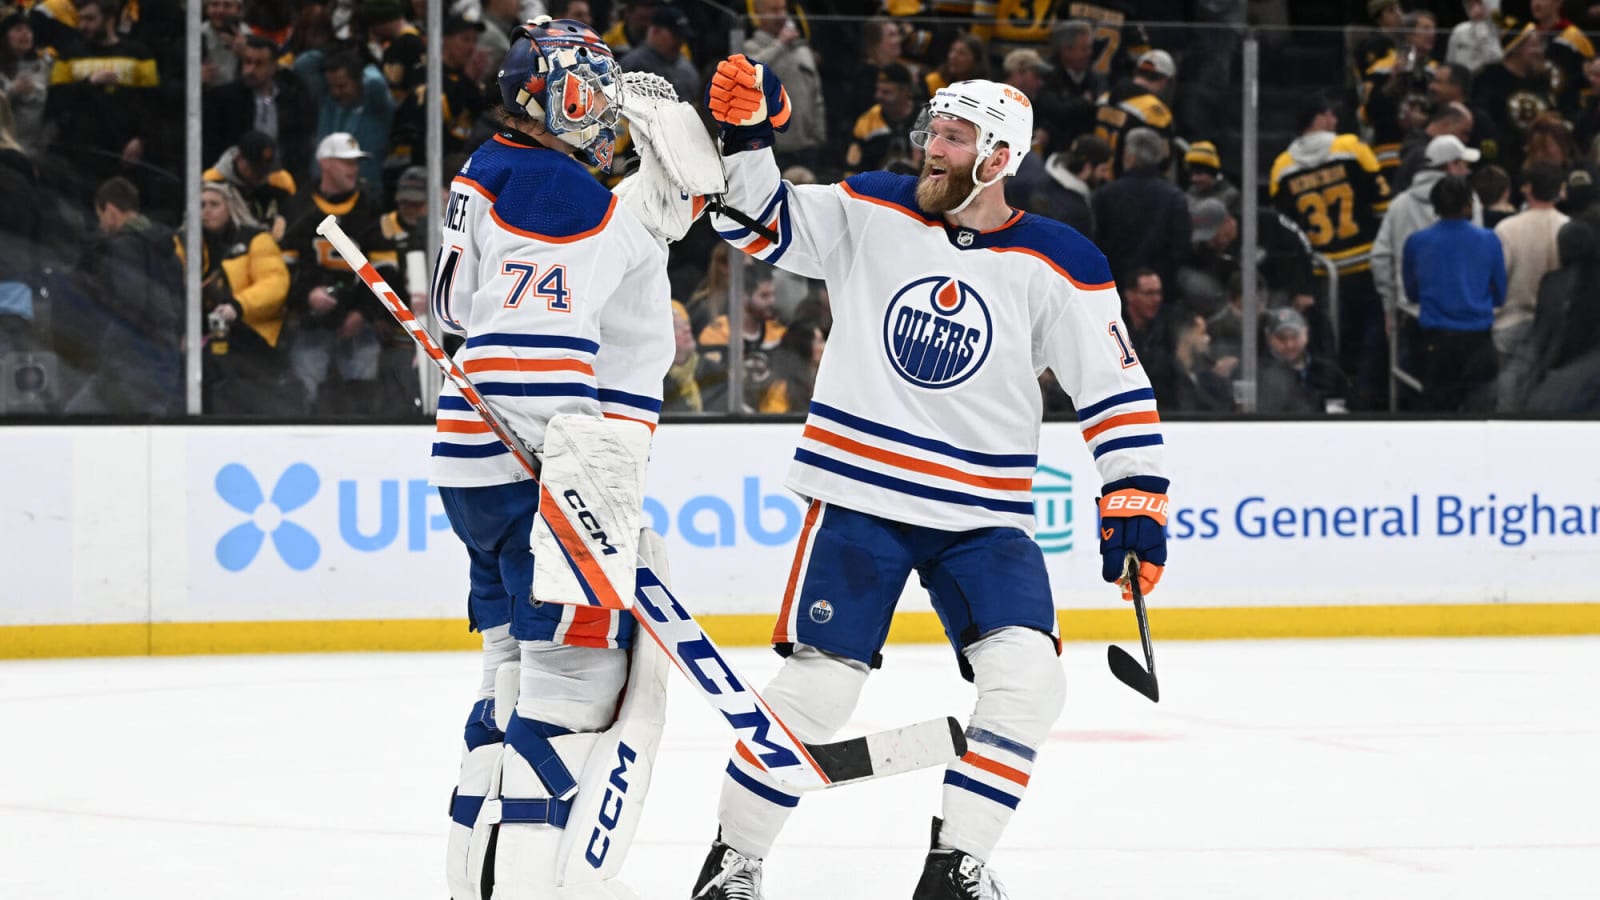 Oilersnation Roundtable: Other than Connor McDavid, who’s been the Edmonton Oilers’ MVP this season?